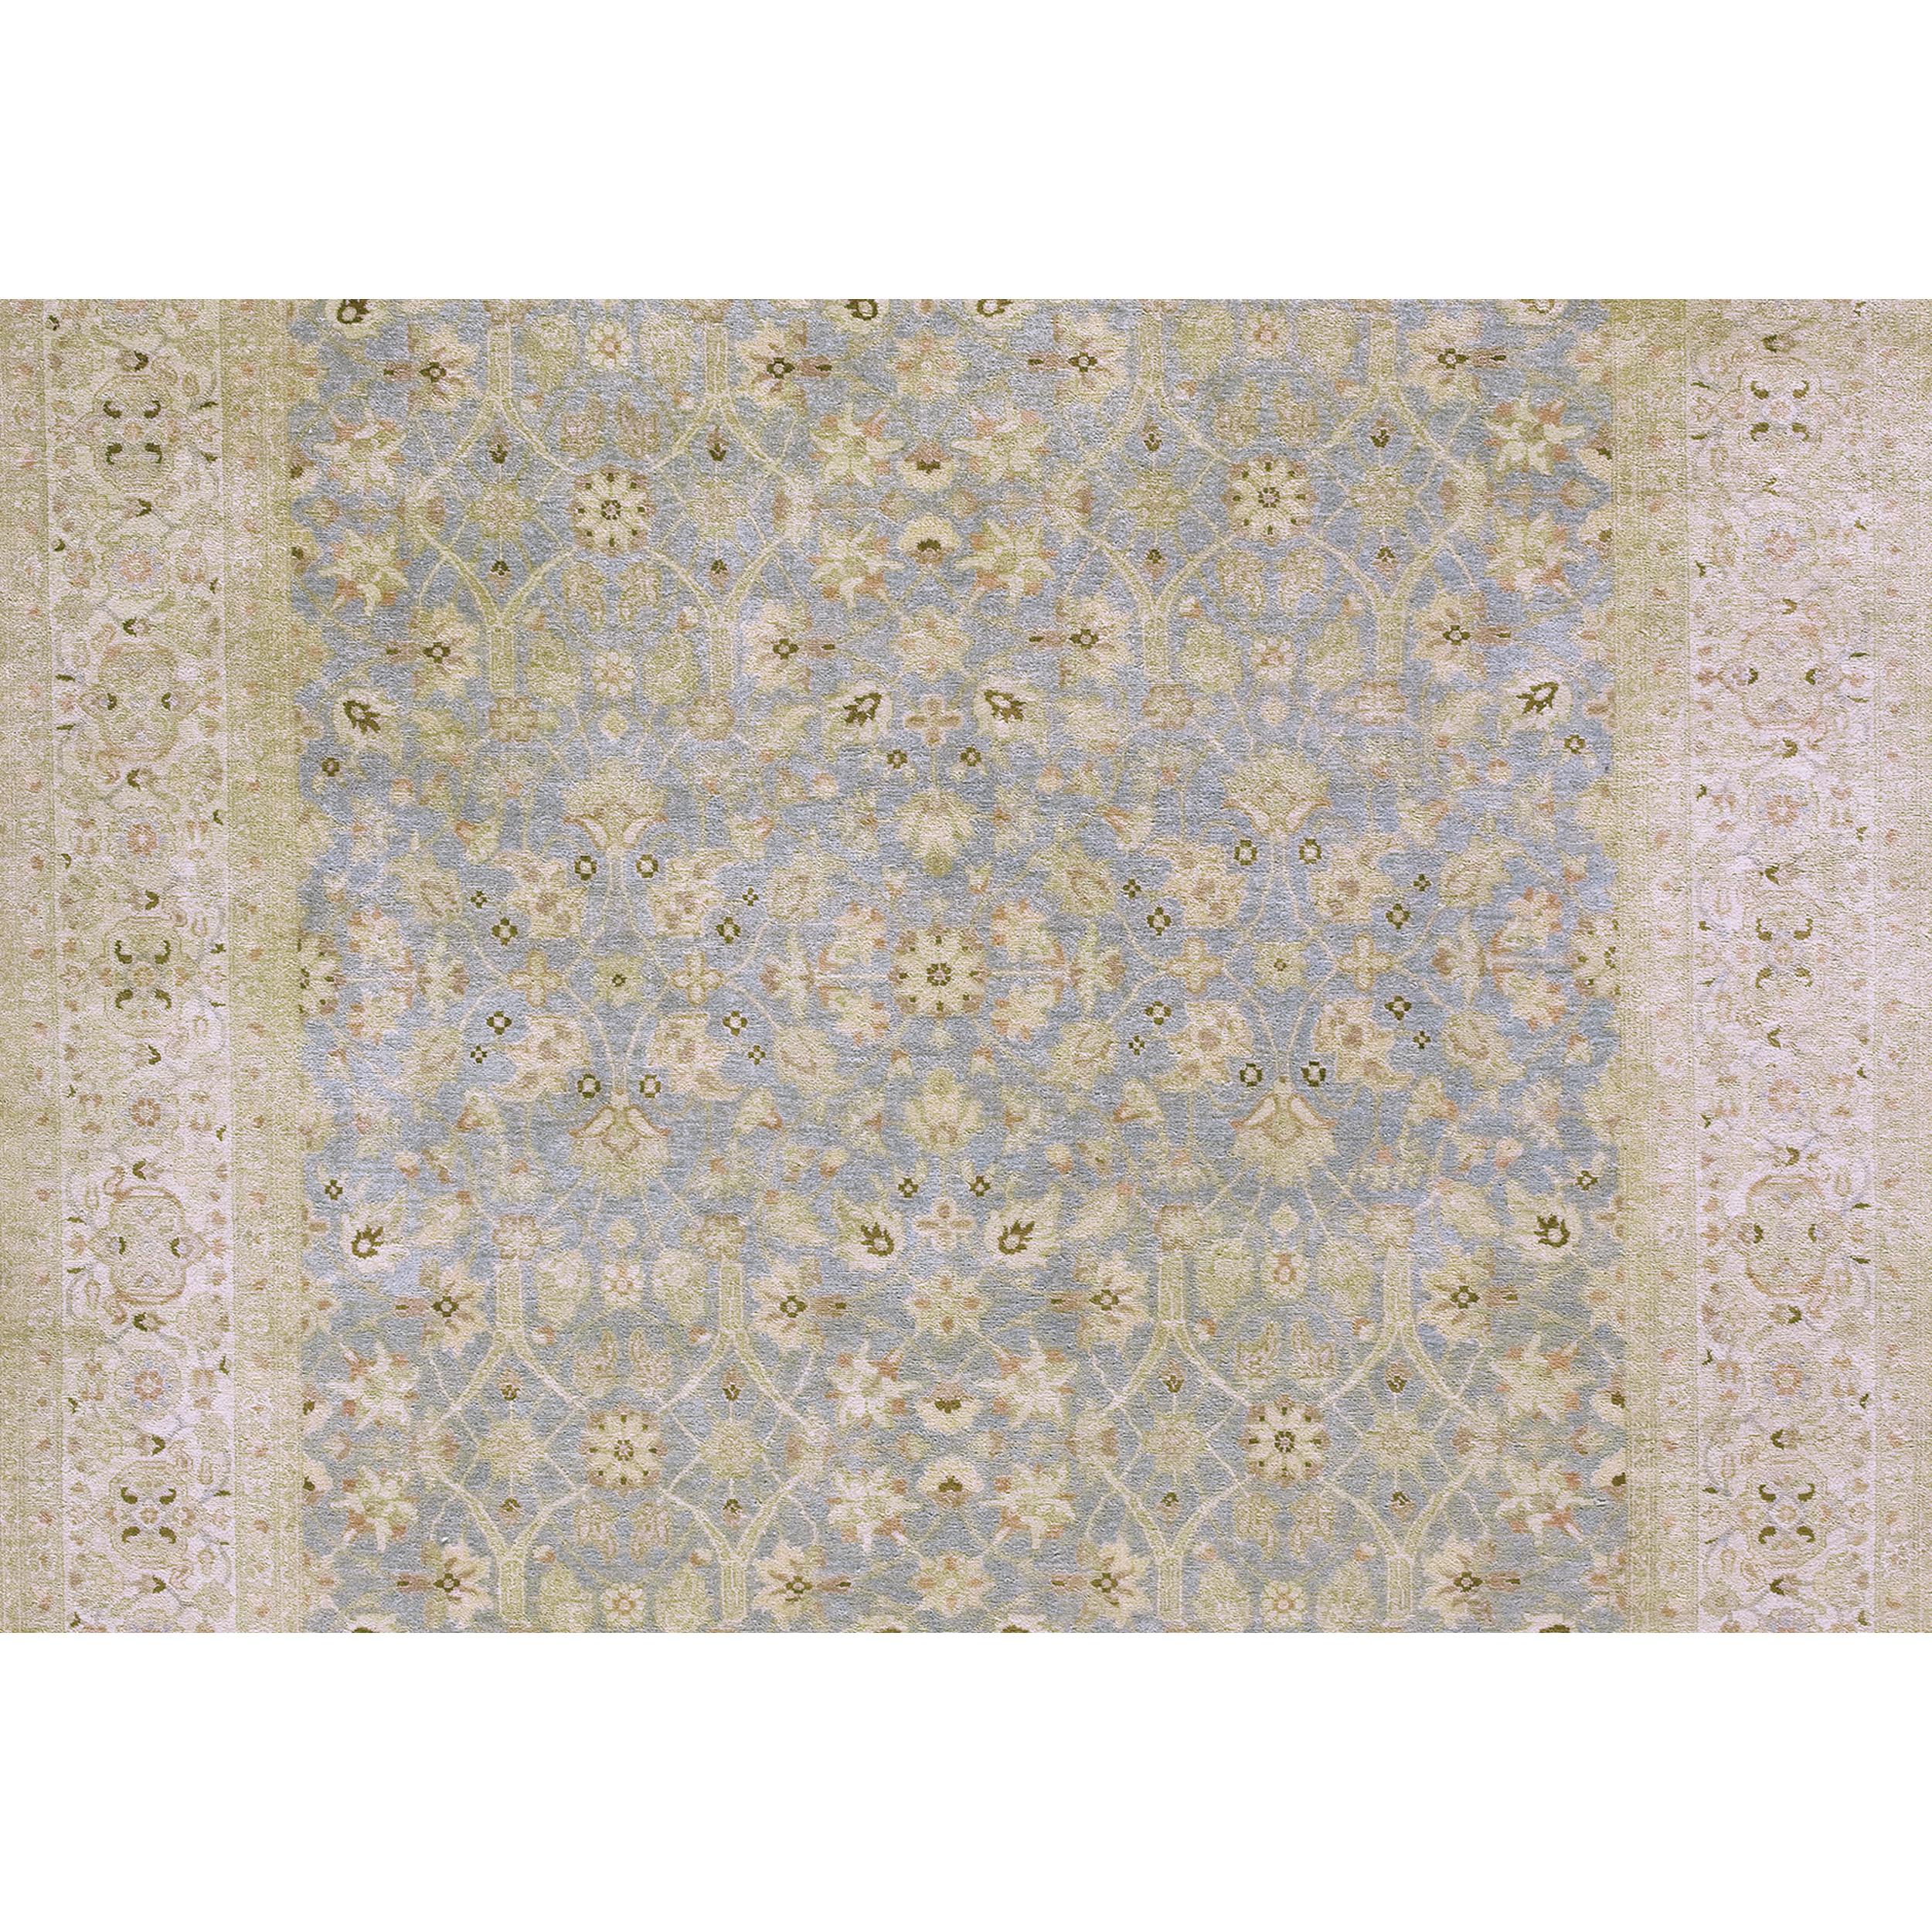 Luxury Traditional Hand-Knotted Tabriz Light Blue and Ivory 10X14 Rug In New Condition For Sale In Secaucus, NJ